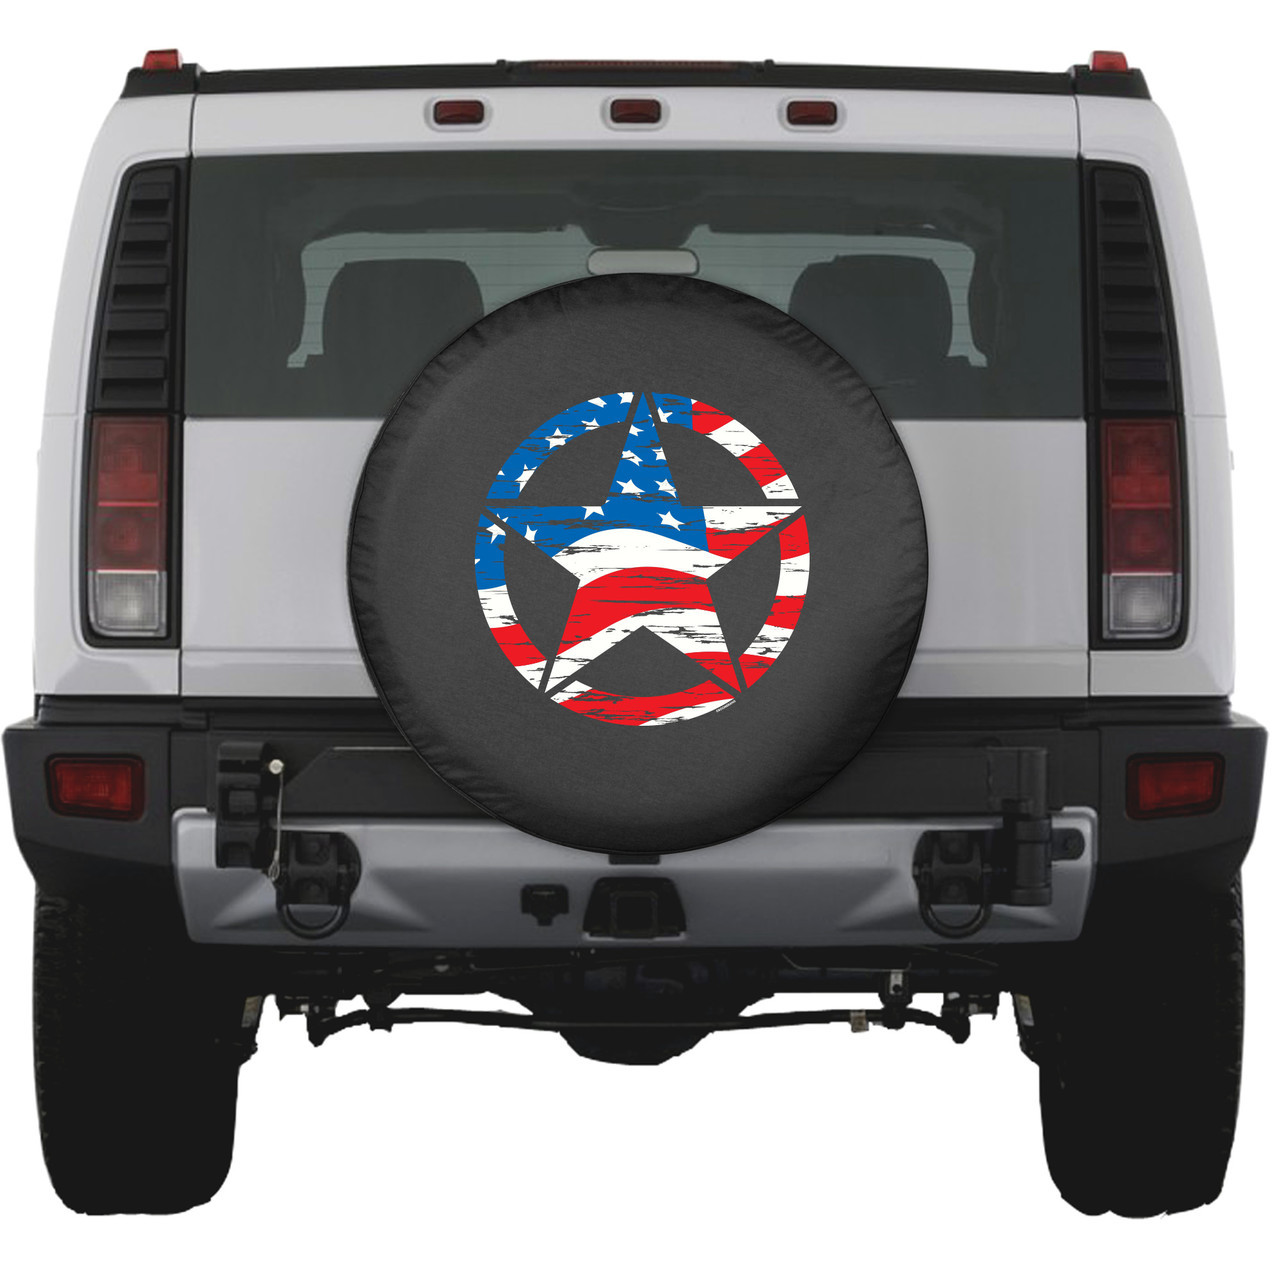 Boomerang Jeep Tire Cover with Distressed American Flag